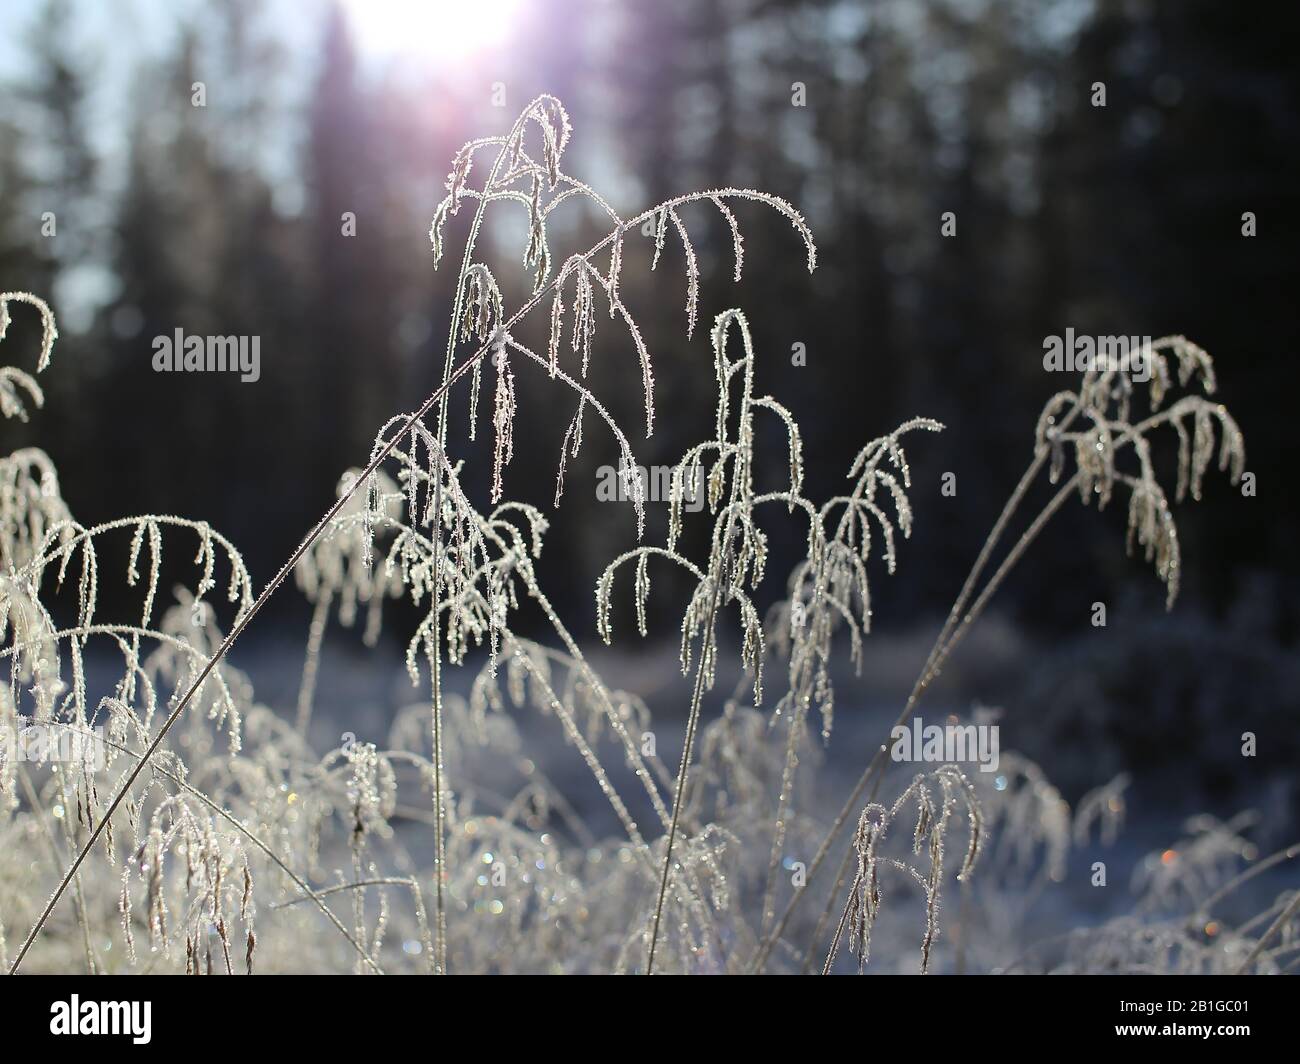 Frosty grass spikes in backlight in front of forest. Stock Photo